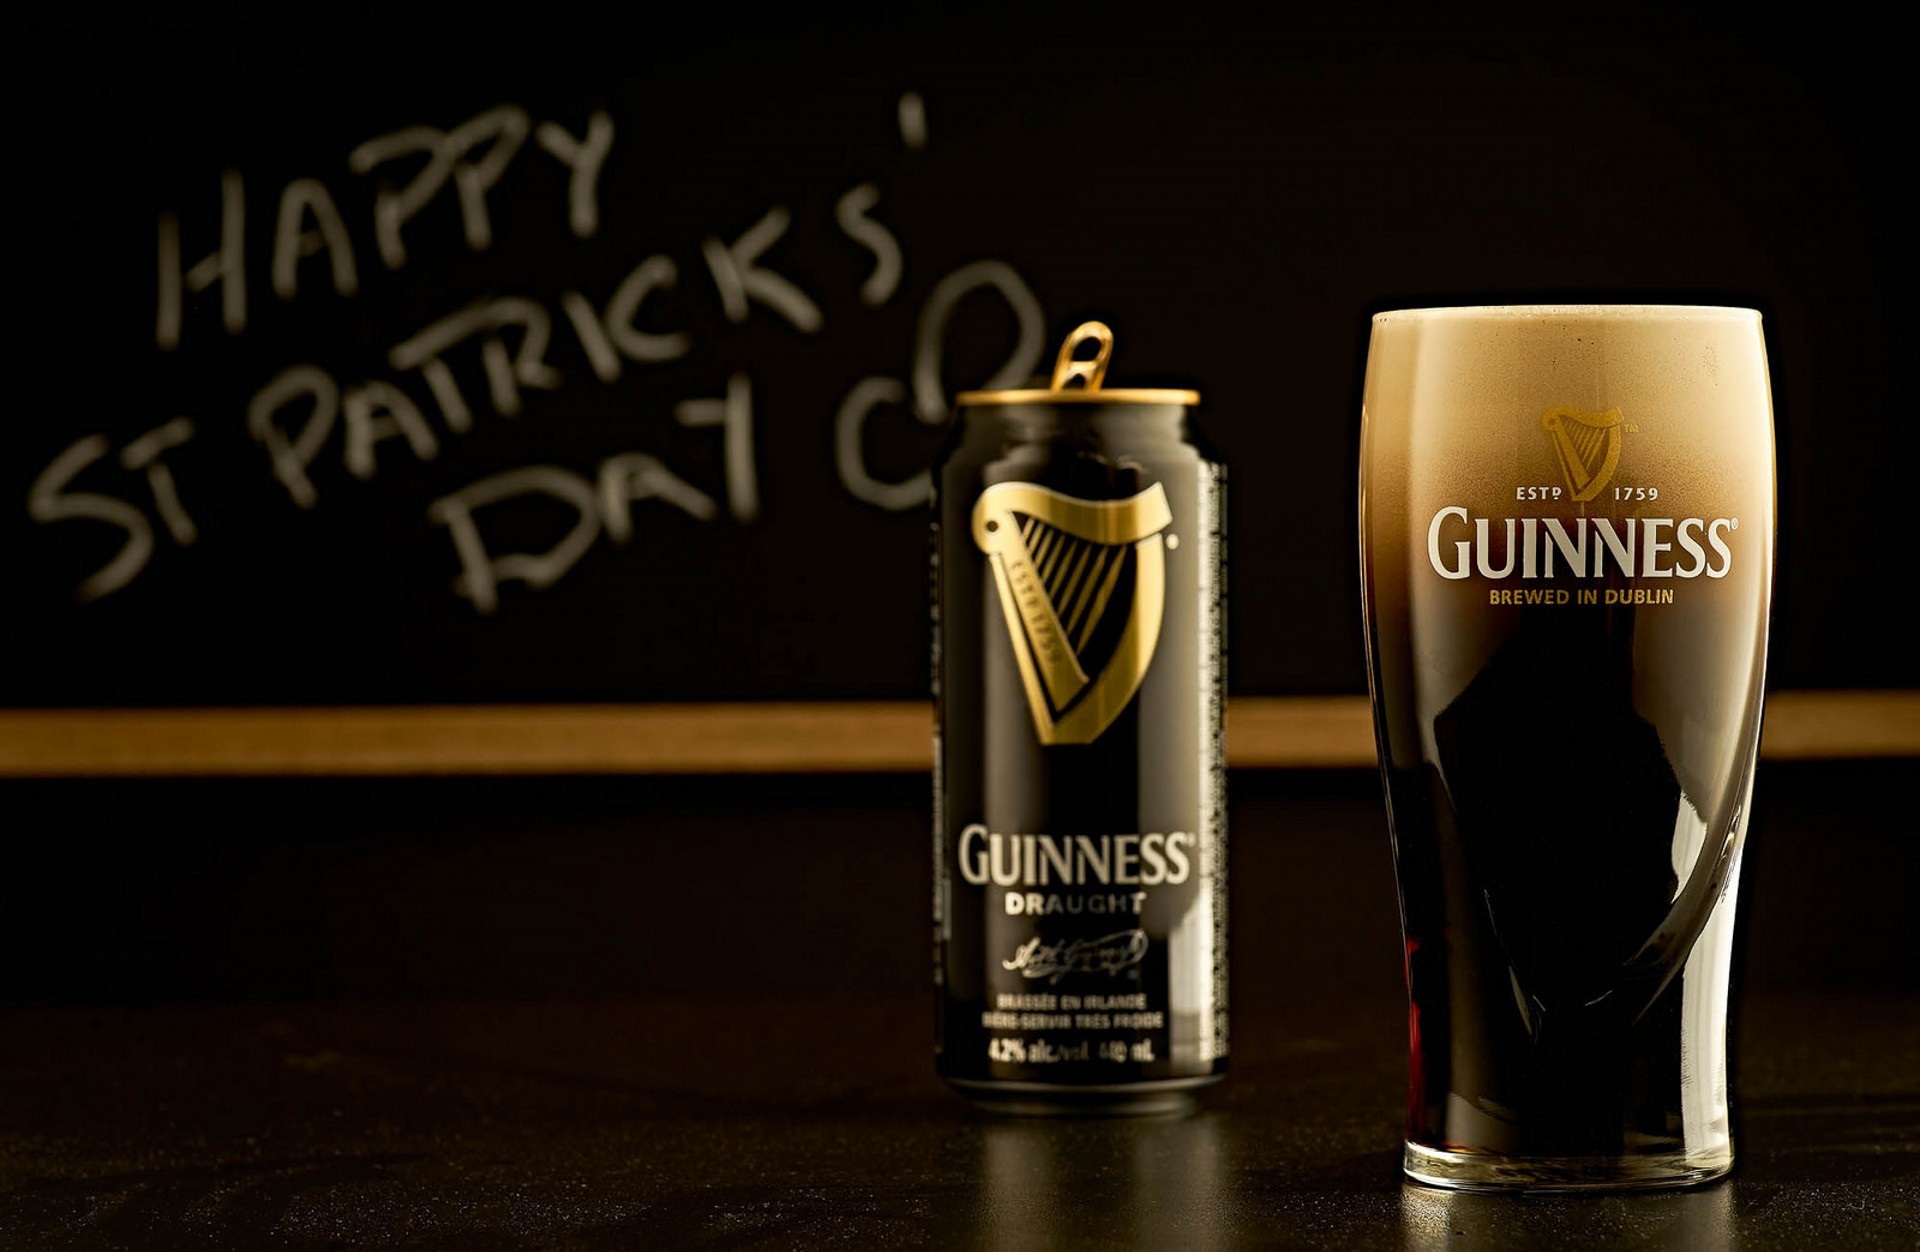 guinness, products, alcohol, beer, st patrick's day